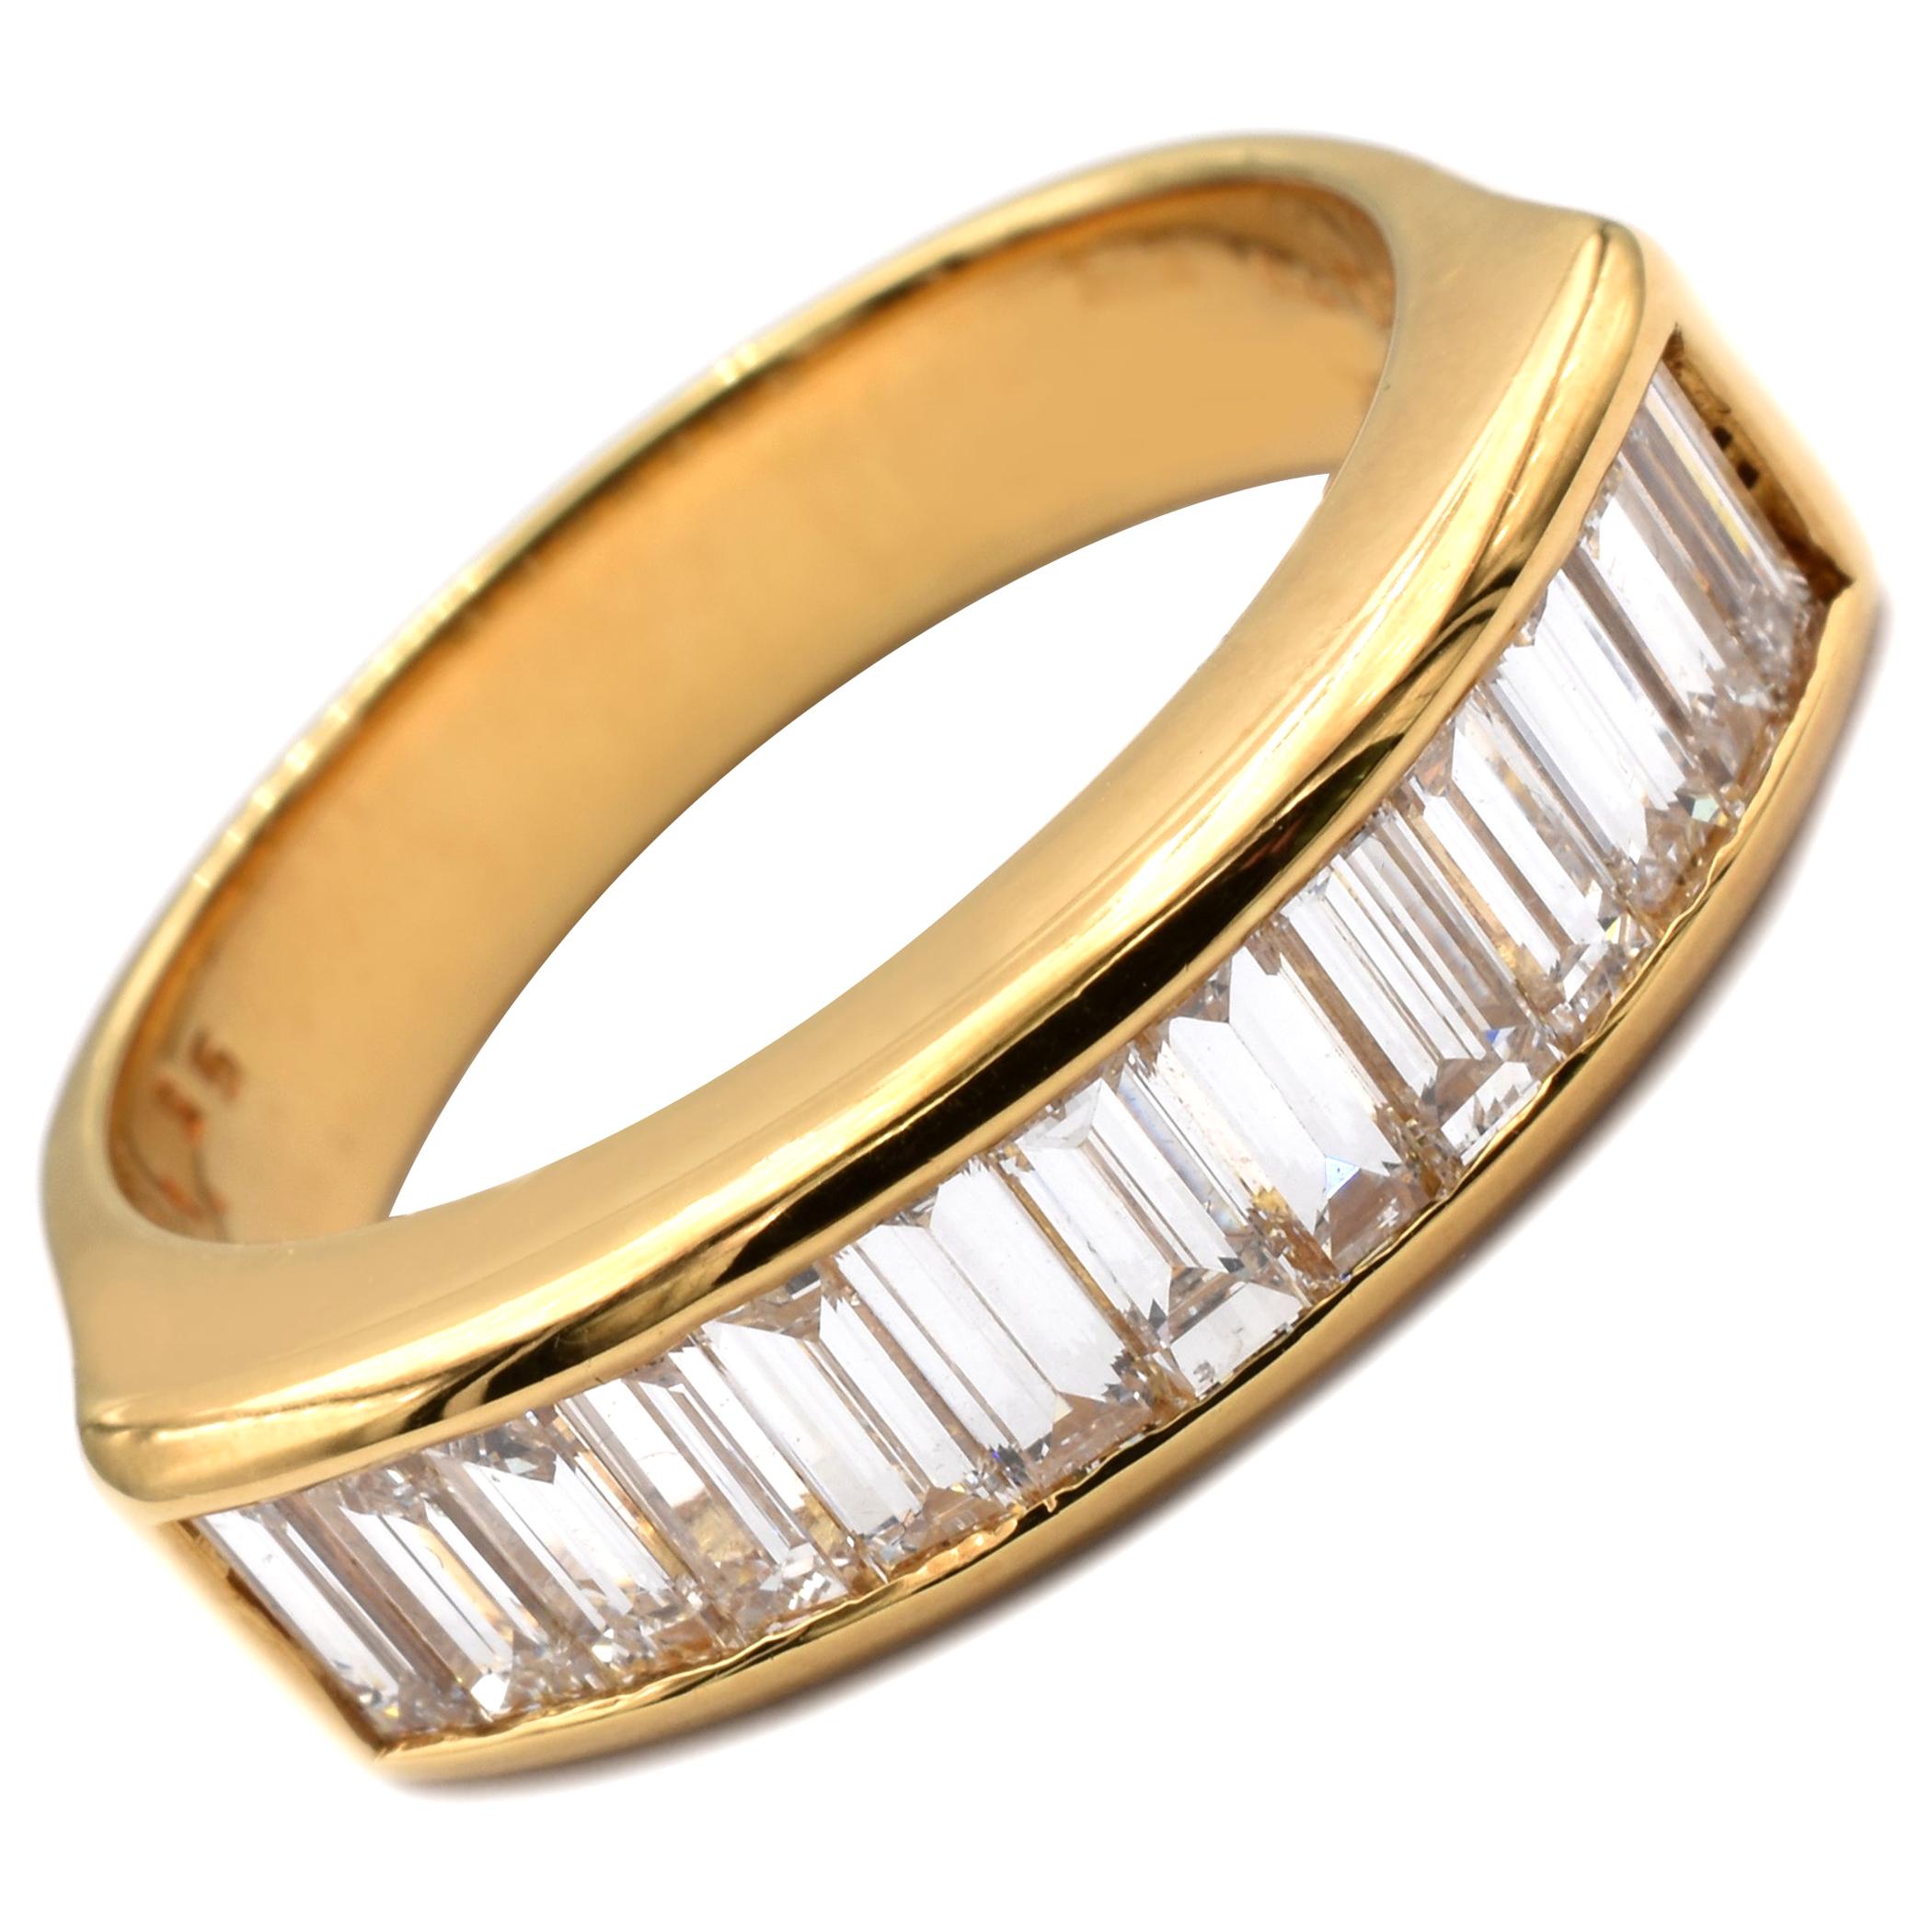 Gilberto Cassola Baguette Diamonds Yellow Gold Ring Made in Italy